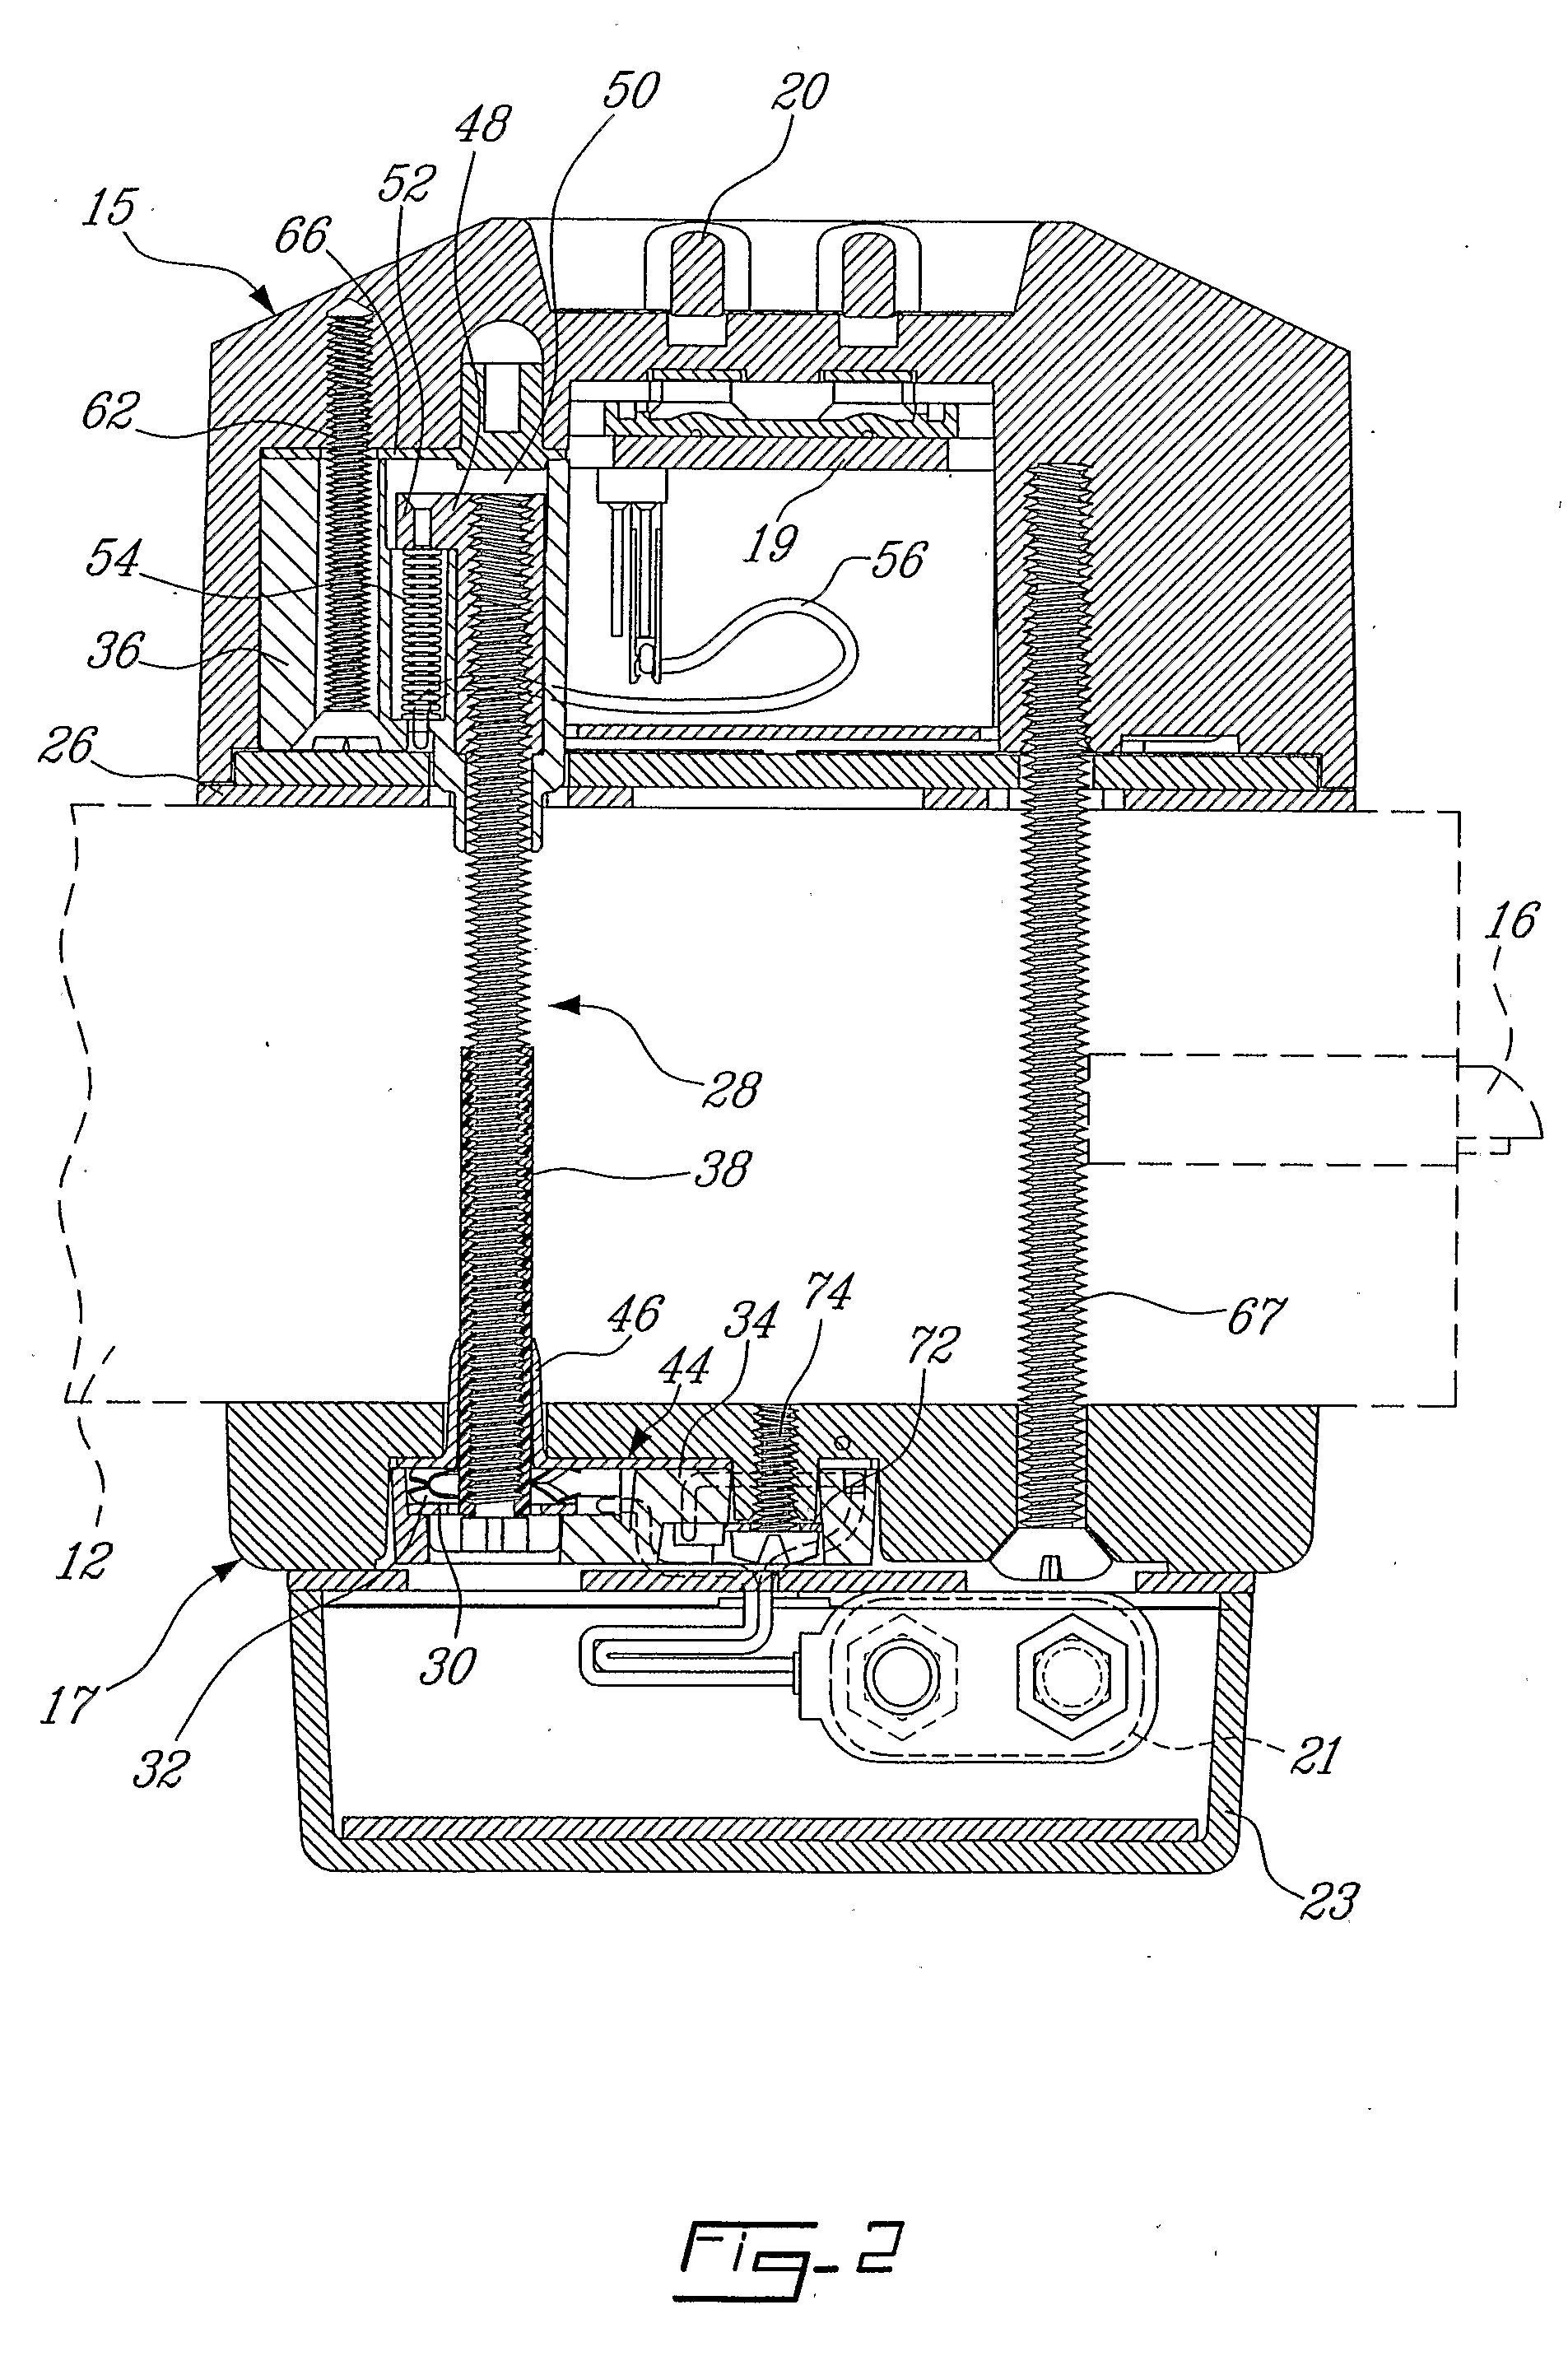 Electrically Conductive Component Suited for Use in Access Control Devices